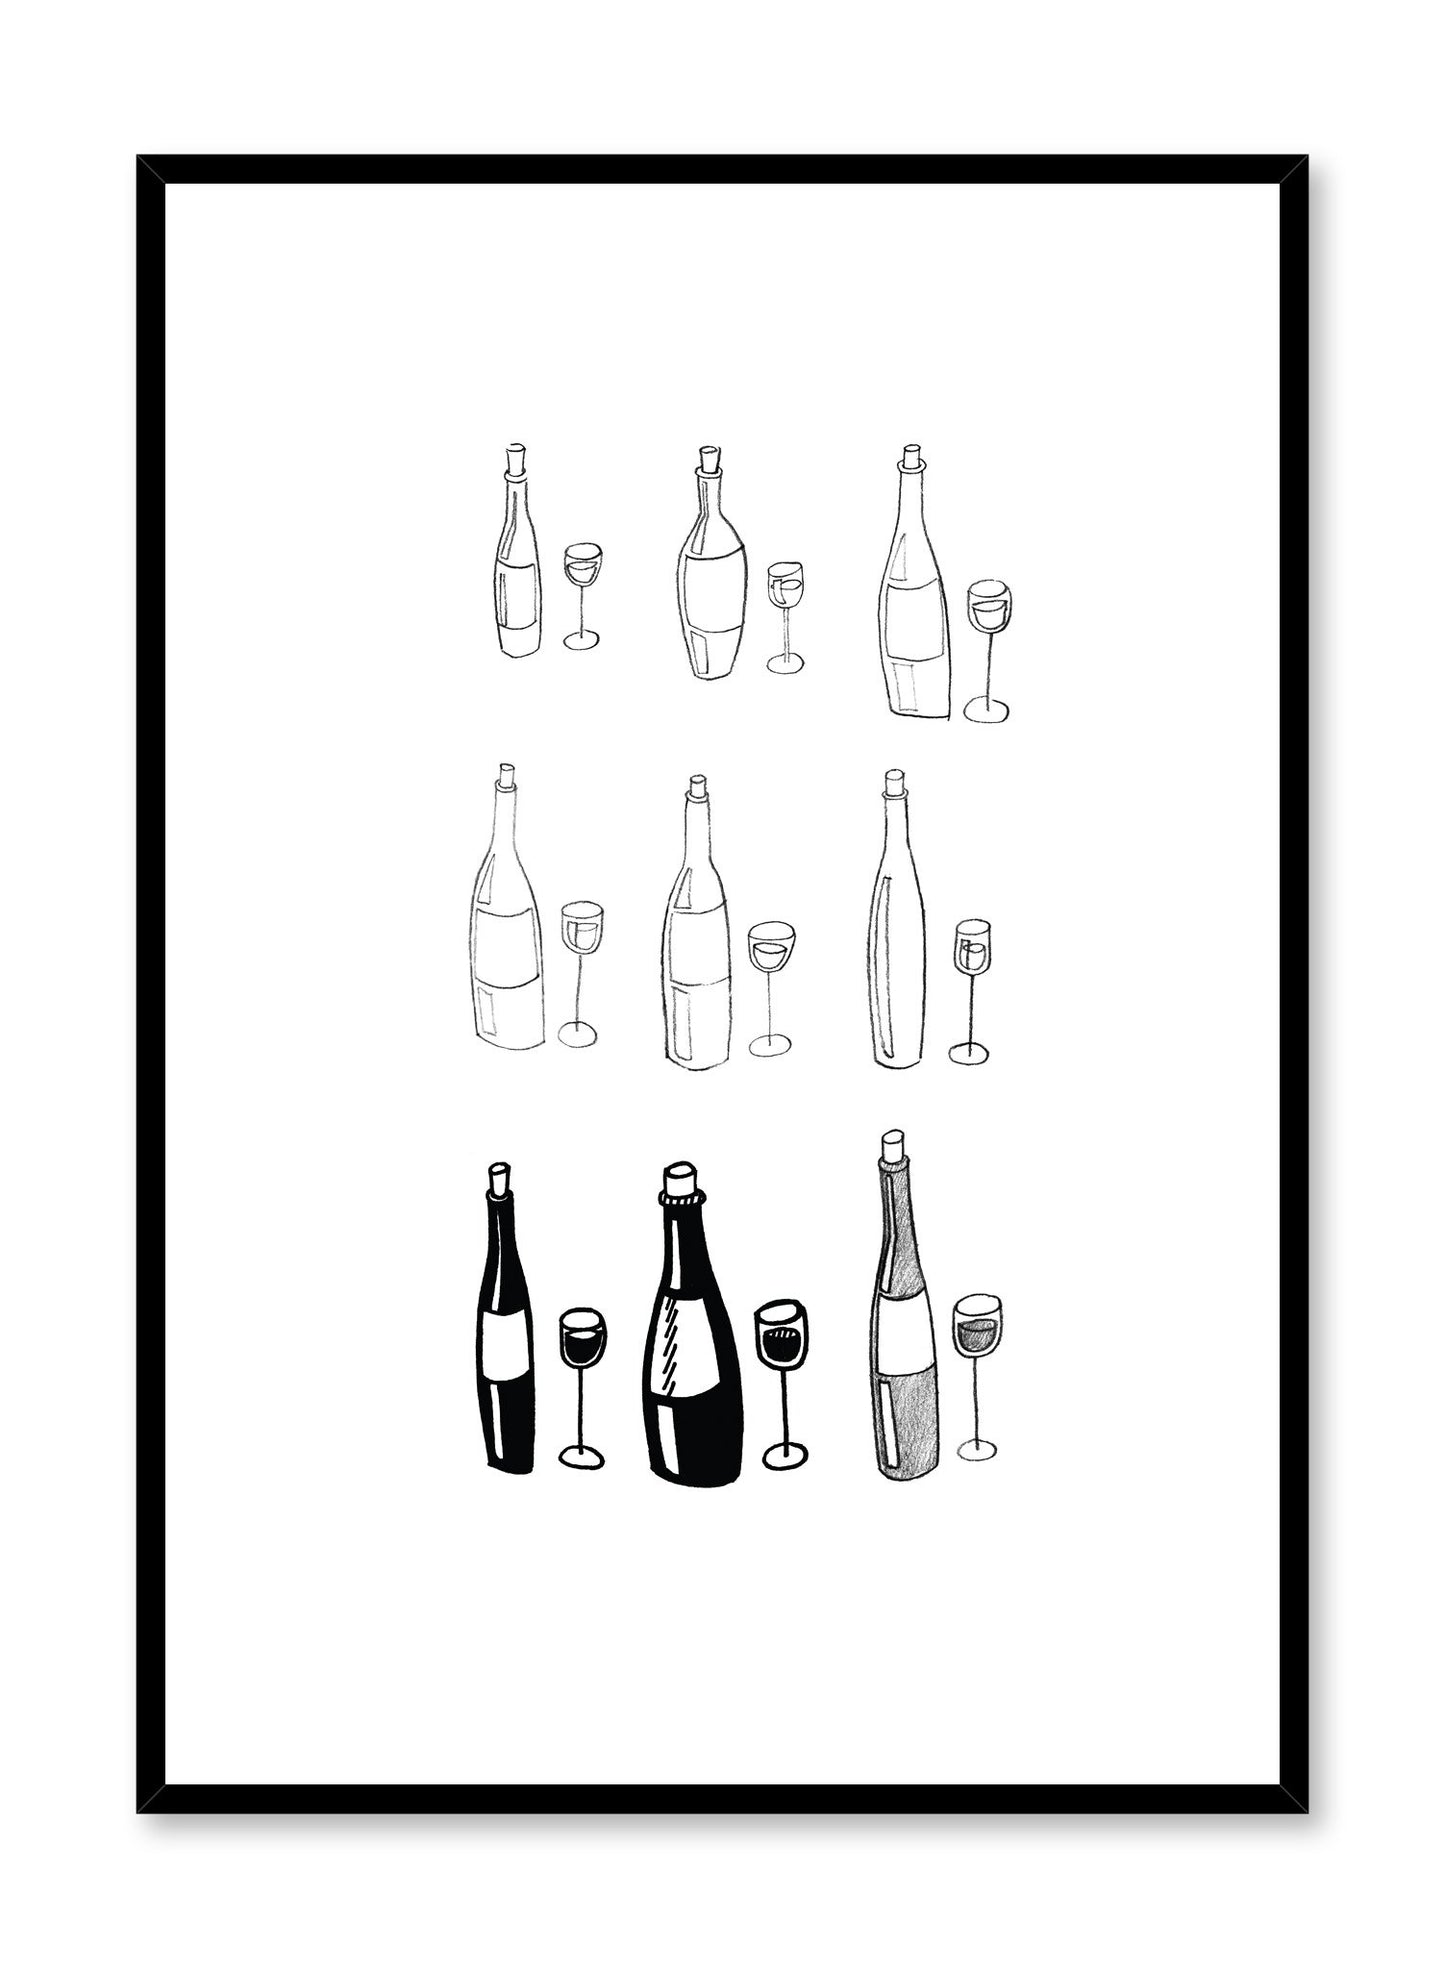 Minimalist poster by Opposite Wall with Vino wine illustration in black and white